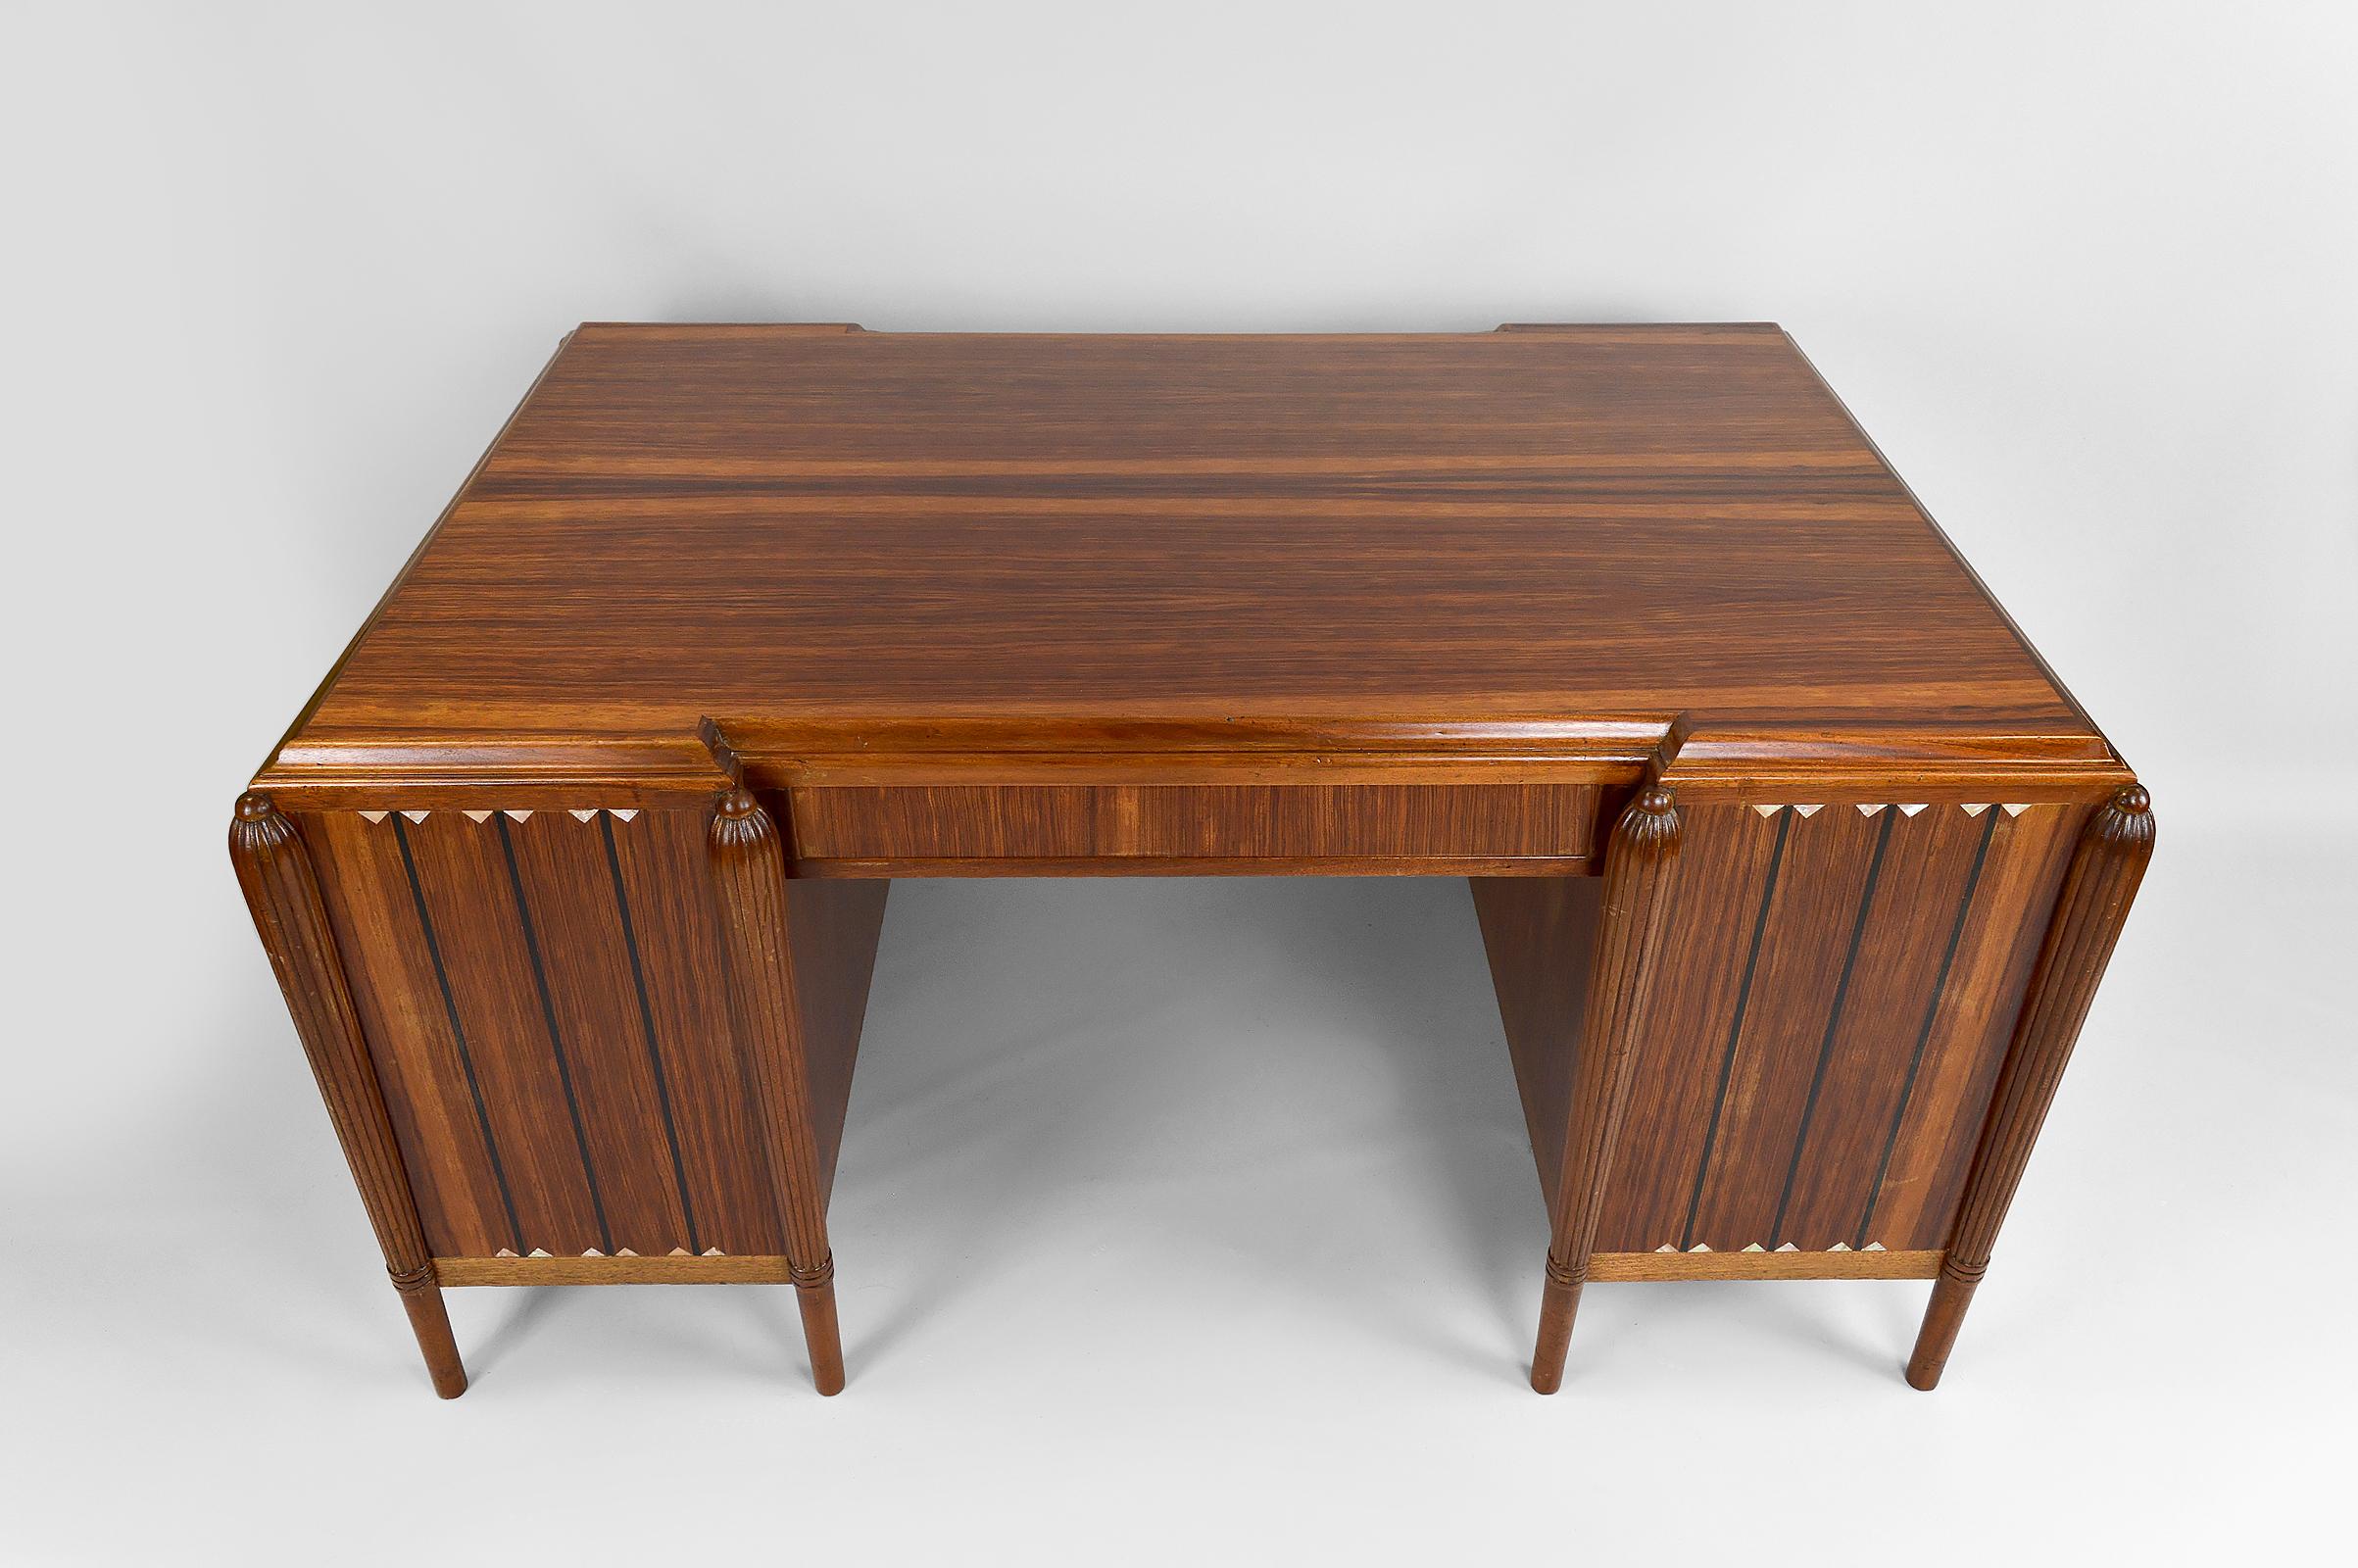 Early 20th Century Large Art Deco Desk in Rosewood, Mother-of-Pearl and Ebony, France, circa 1920